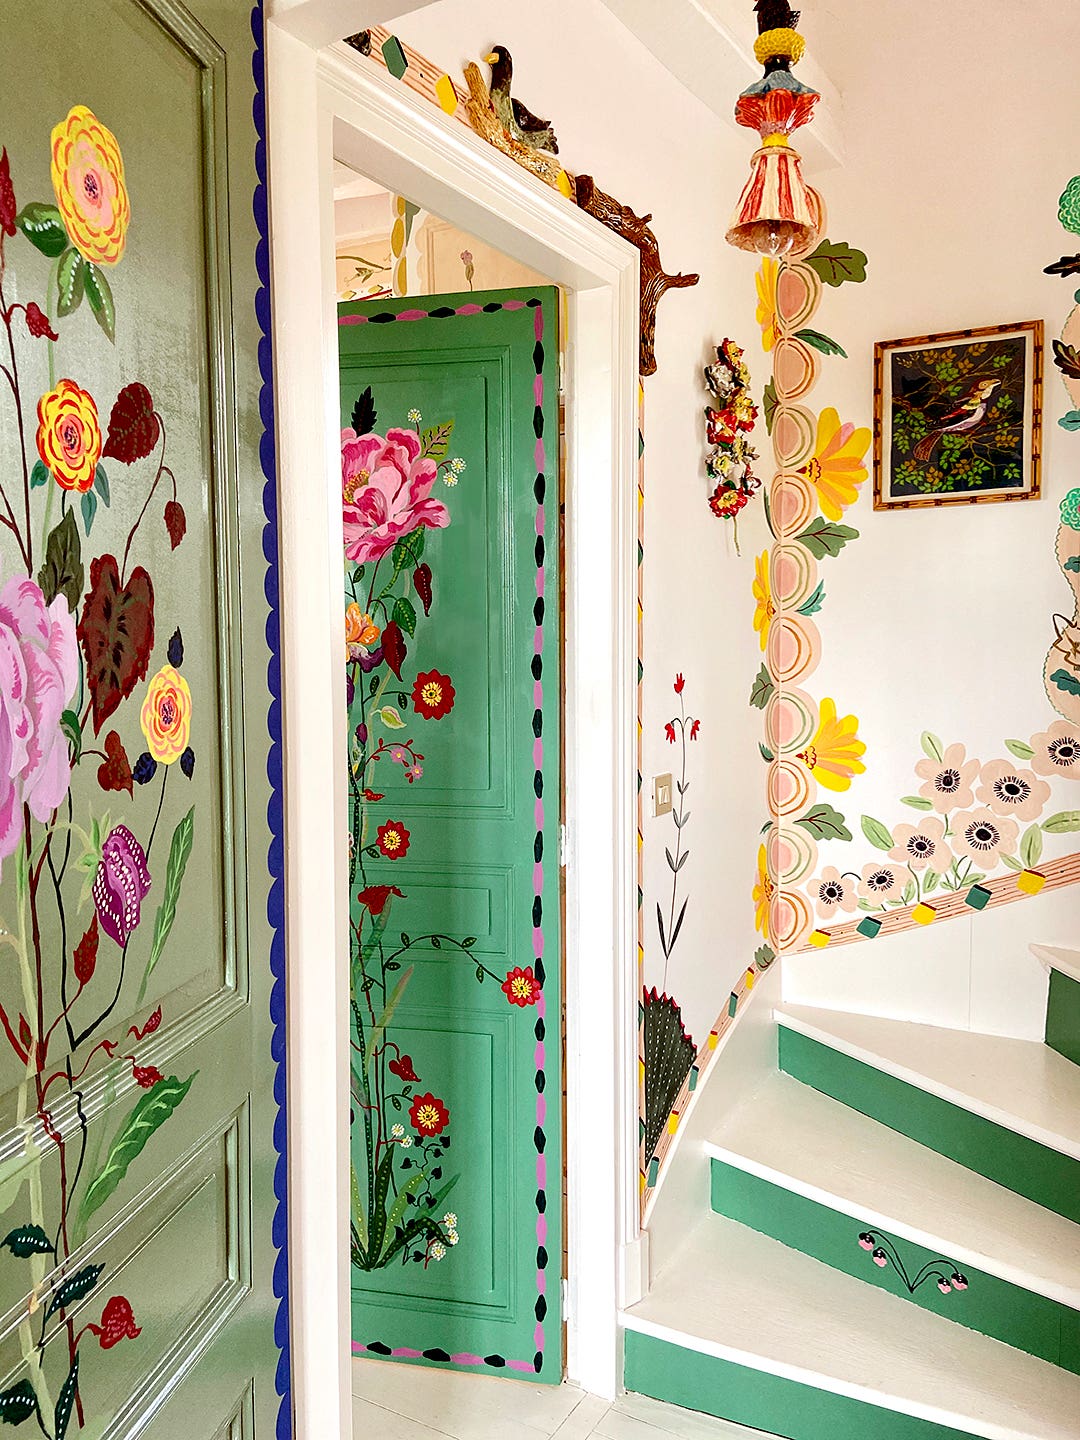 Floral-painted staircase